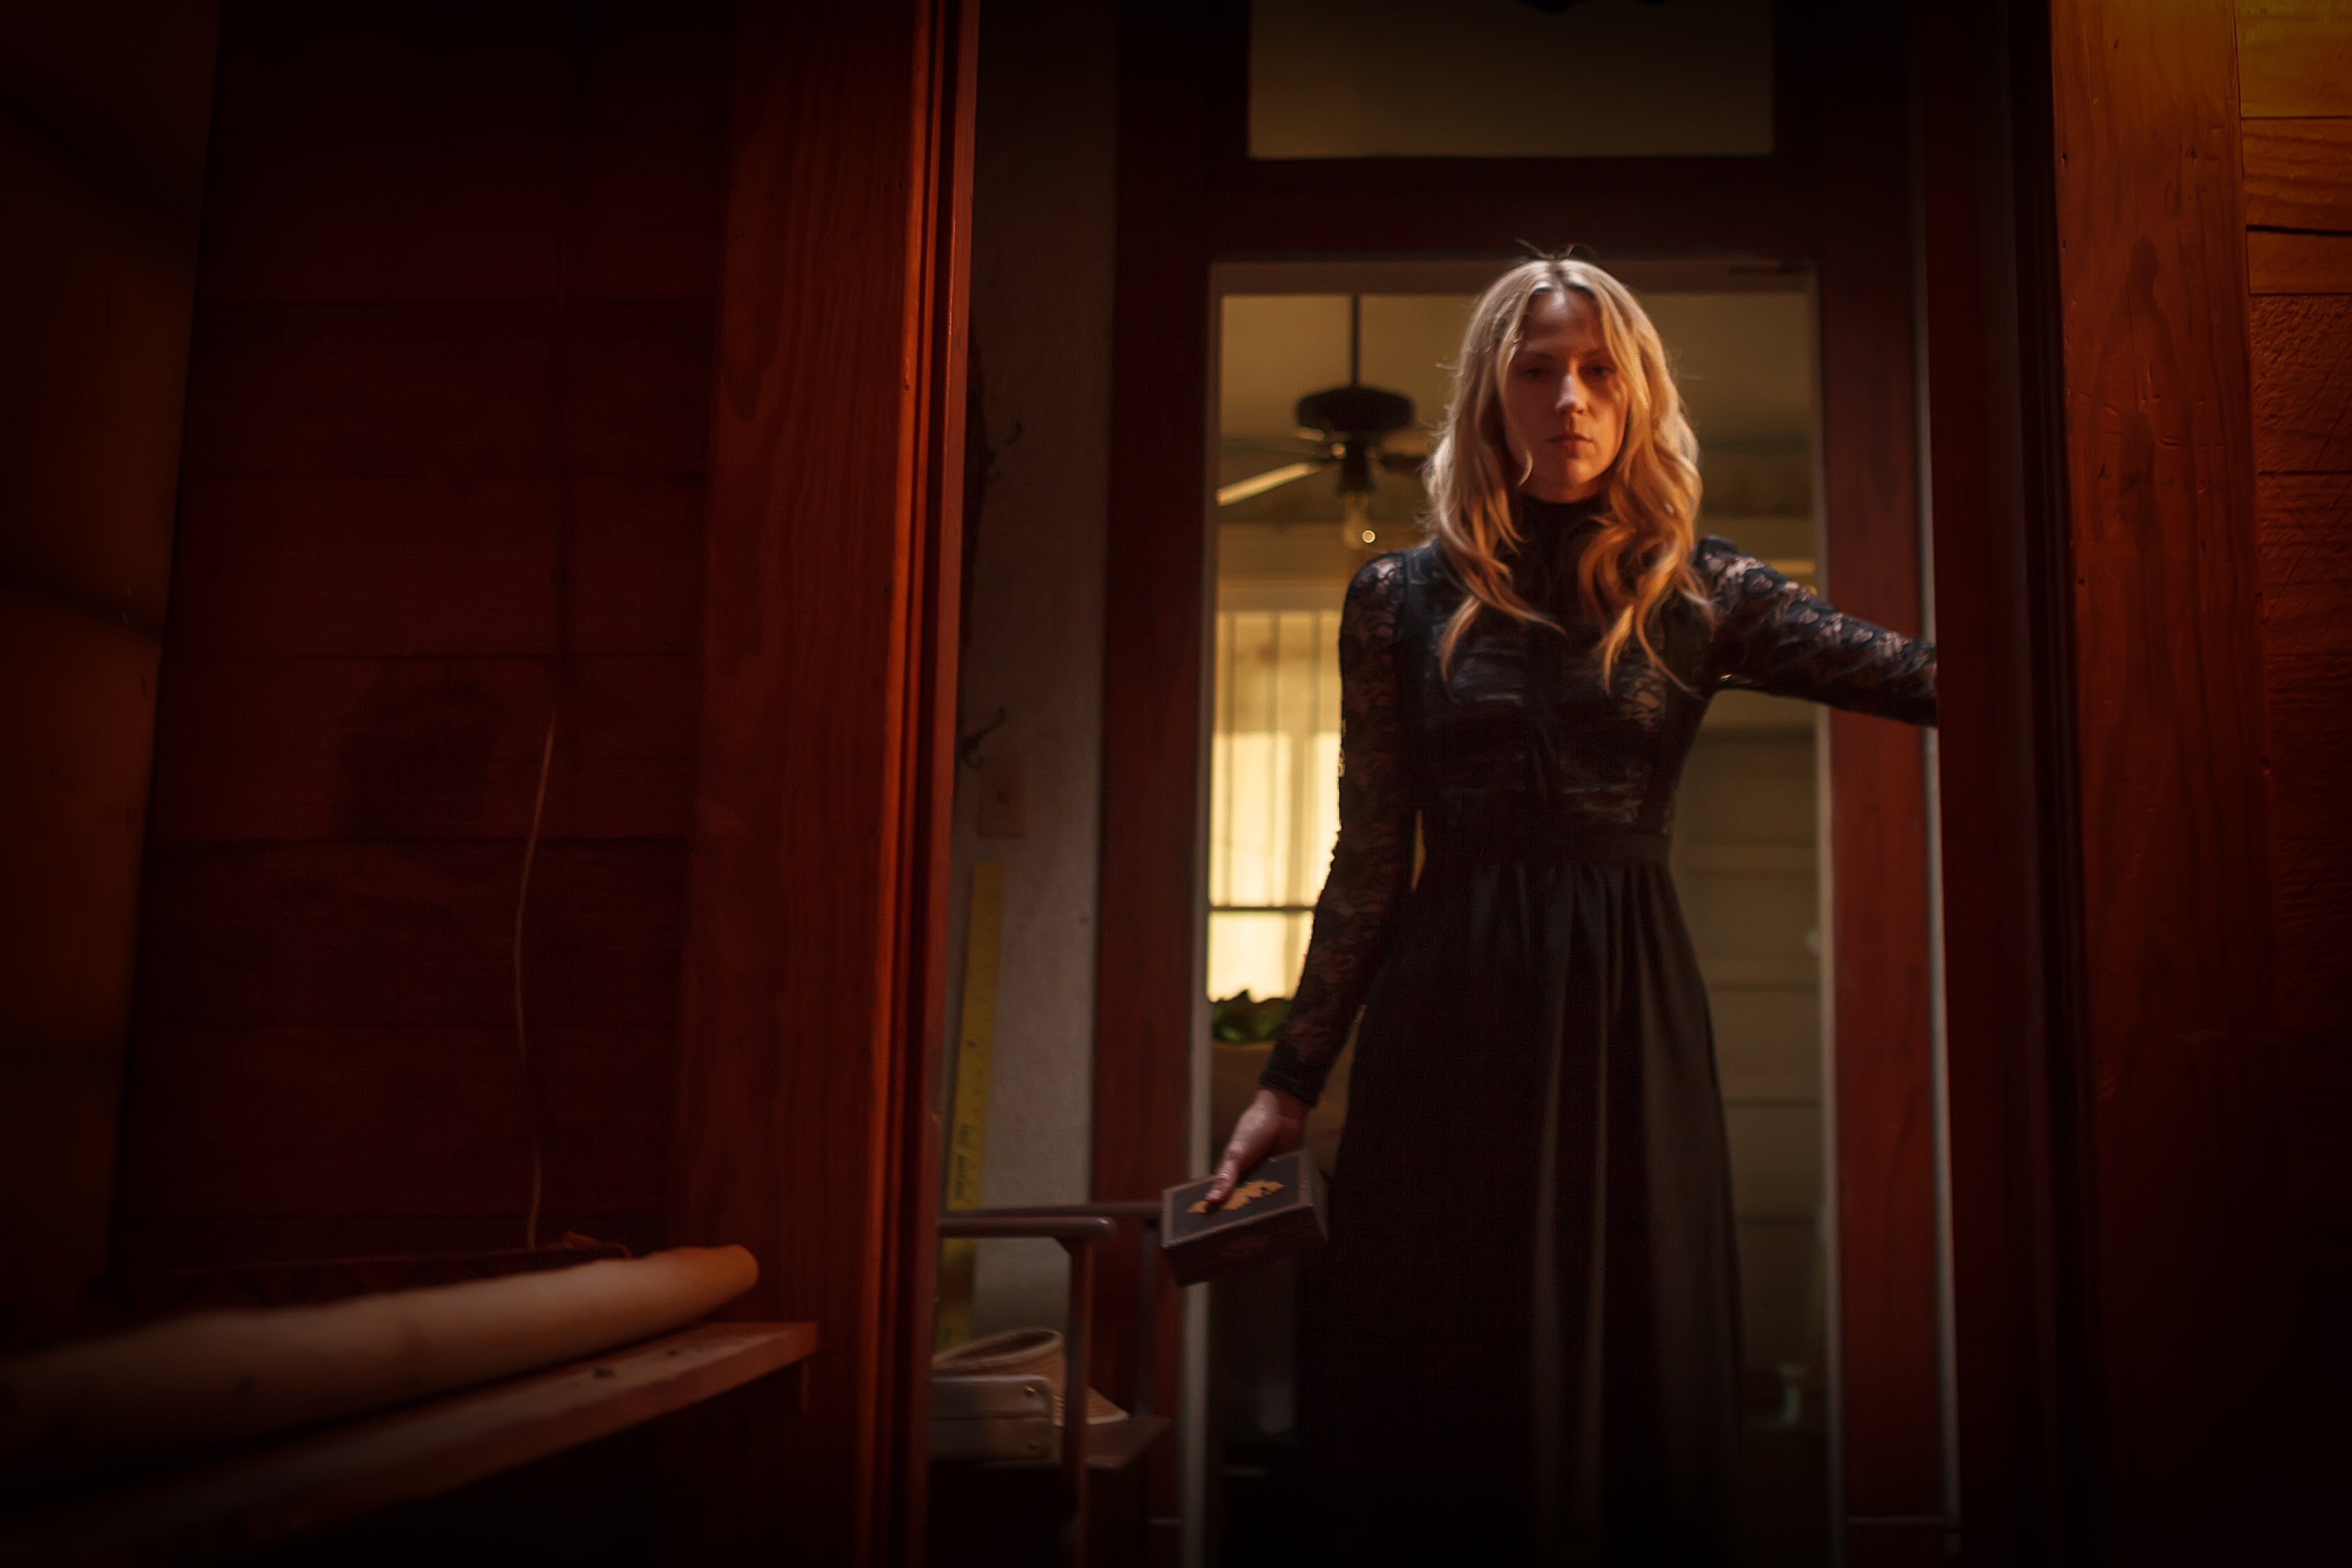 Film Review: The Intruders (2015)